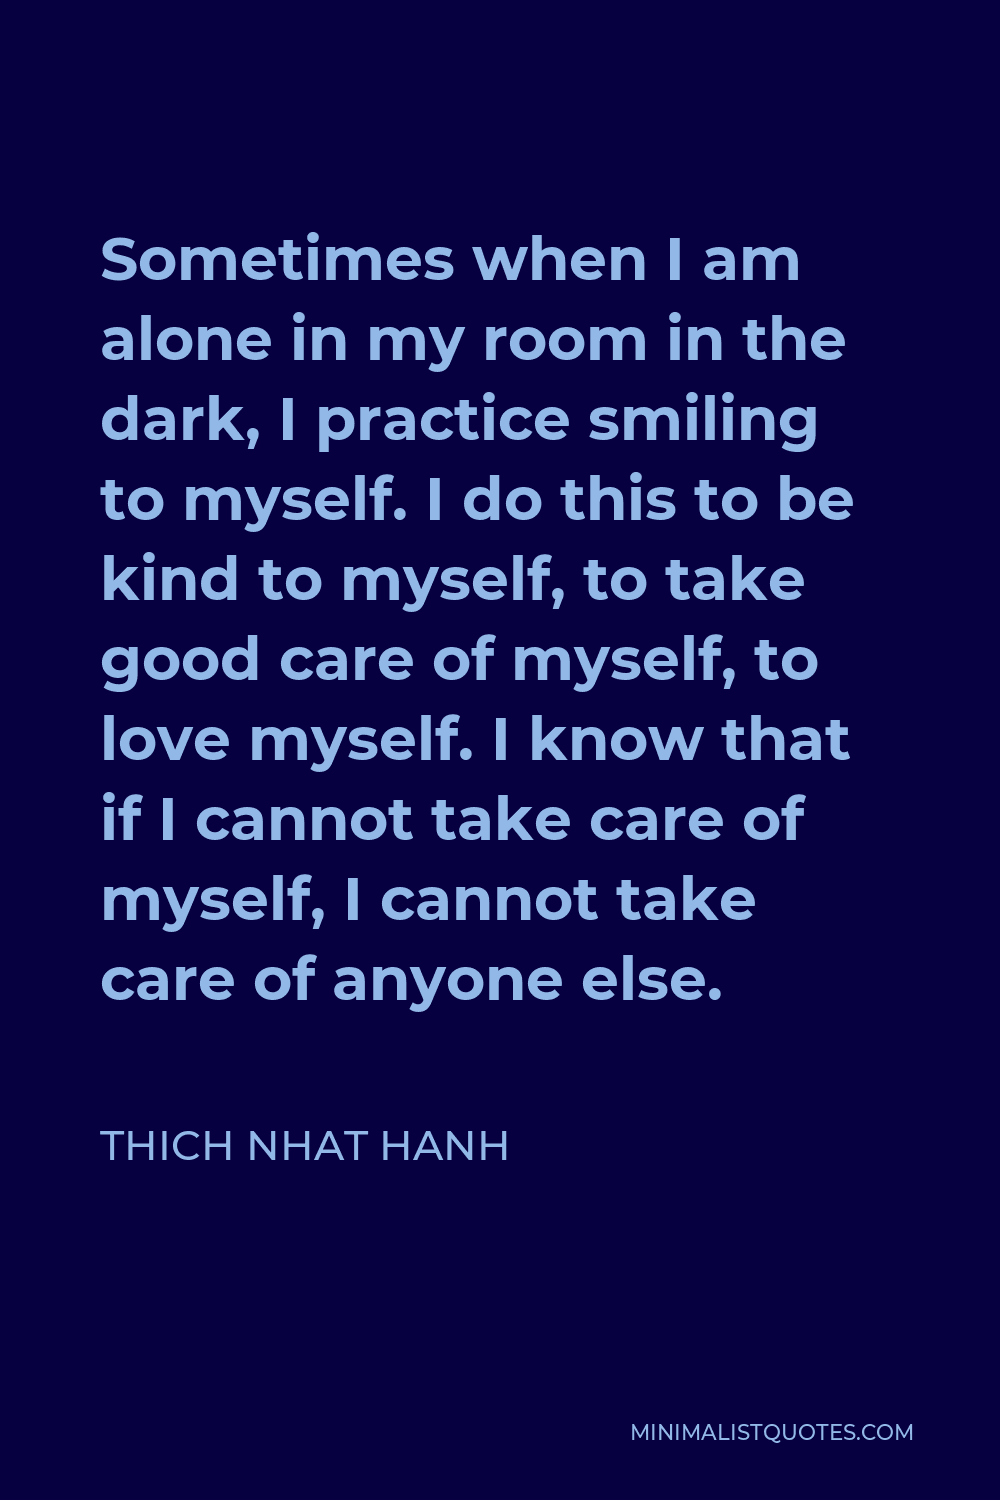 Thich Nhat Hanh Quote: Sometimes when I am alone in my room in the ...